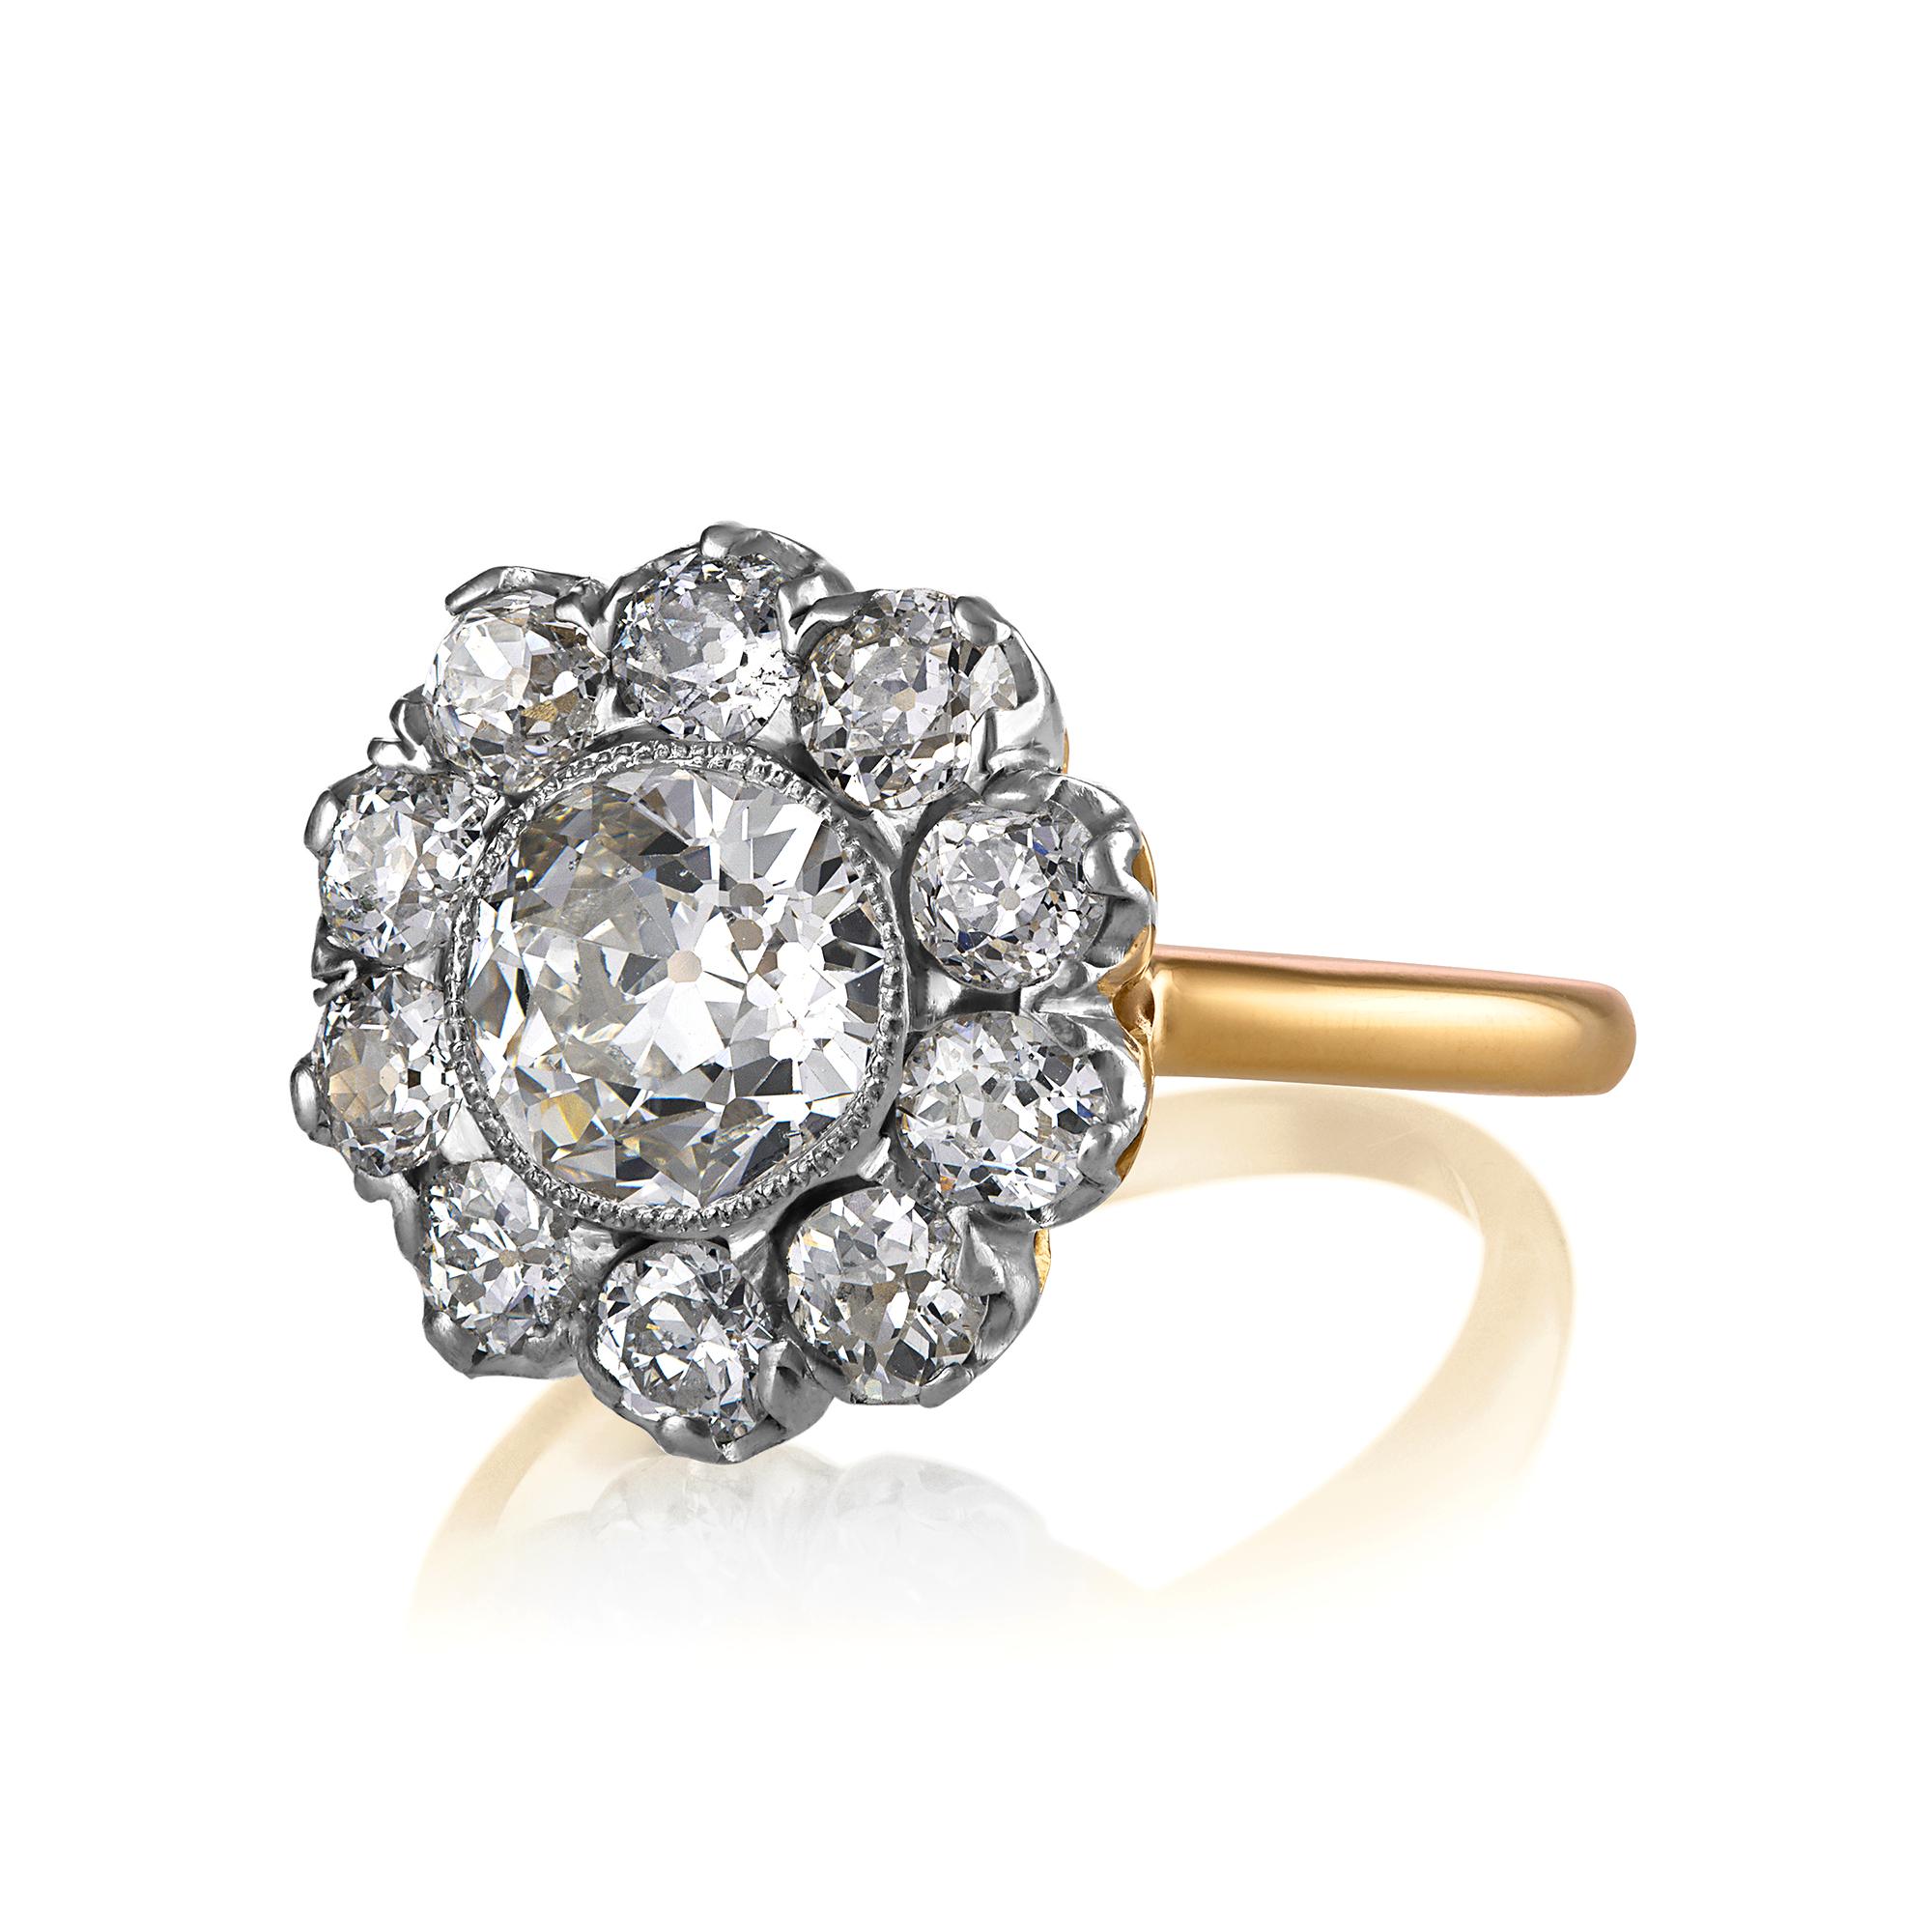 This breathtakingly beautiful, darling, early-twentieth century Edwardian Flower shaped, Cluster Ring finely hand crafted in platinum over 18 karat yellow gold.

The Center Diamond is an OLD EUROPEAN Cut 1.57ct in J color, SI1 clarity, accompanied